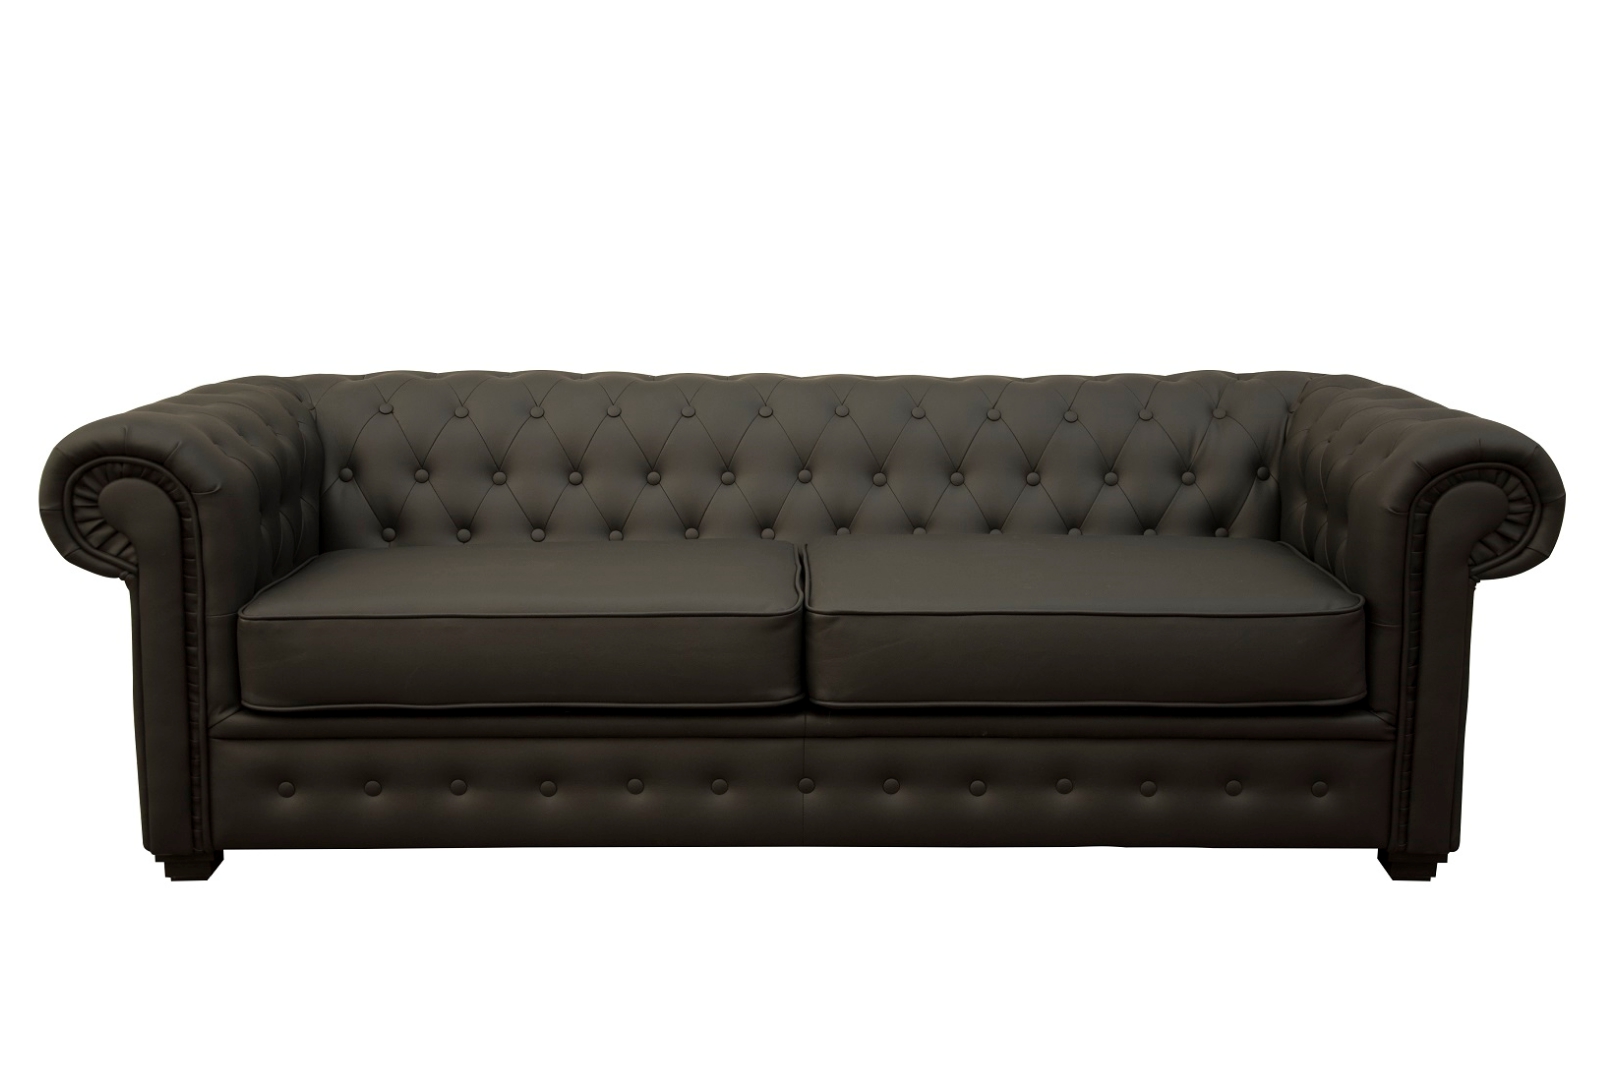 Imperial 2 Seater Faux Leather Sofa Bed, Imitation Leather Sofa Bed